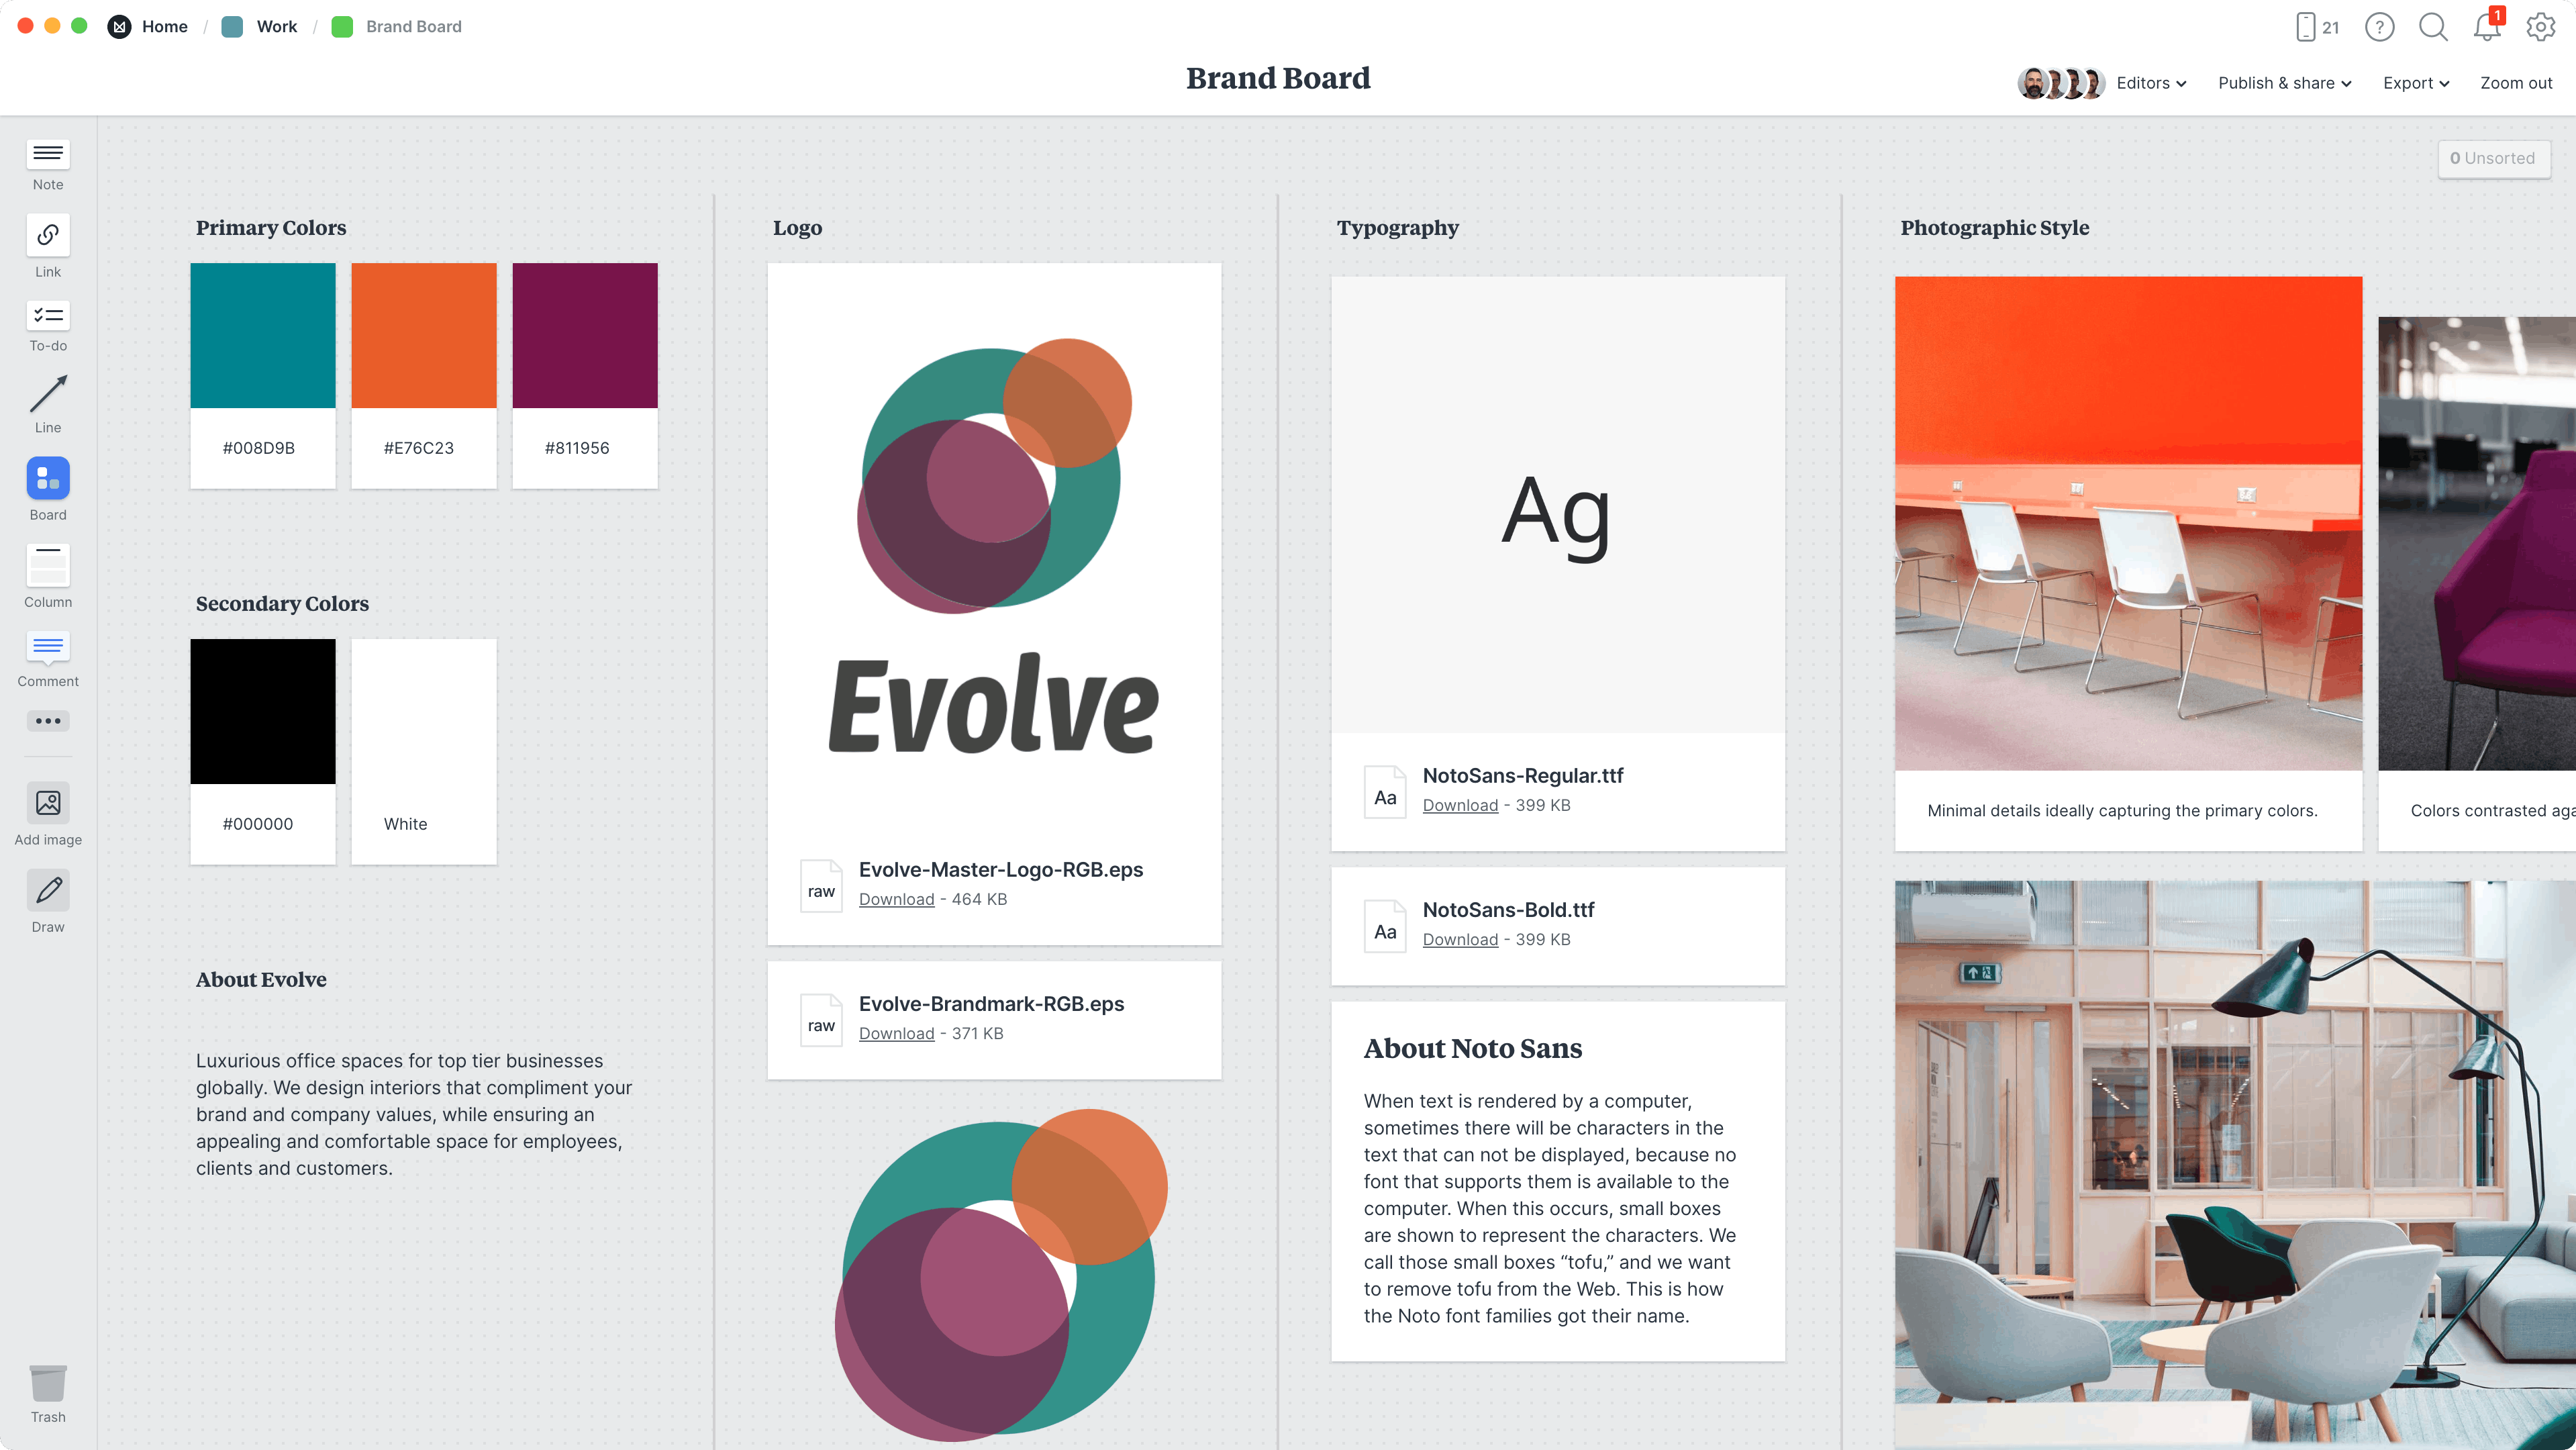 Brand Board Template, within the Milanote app